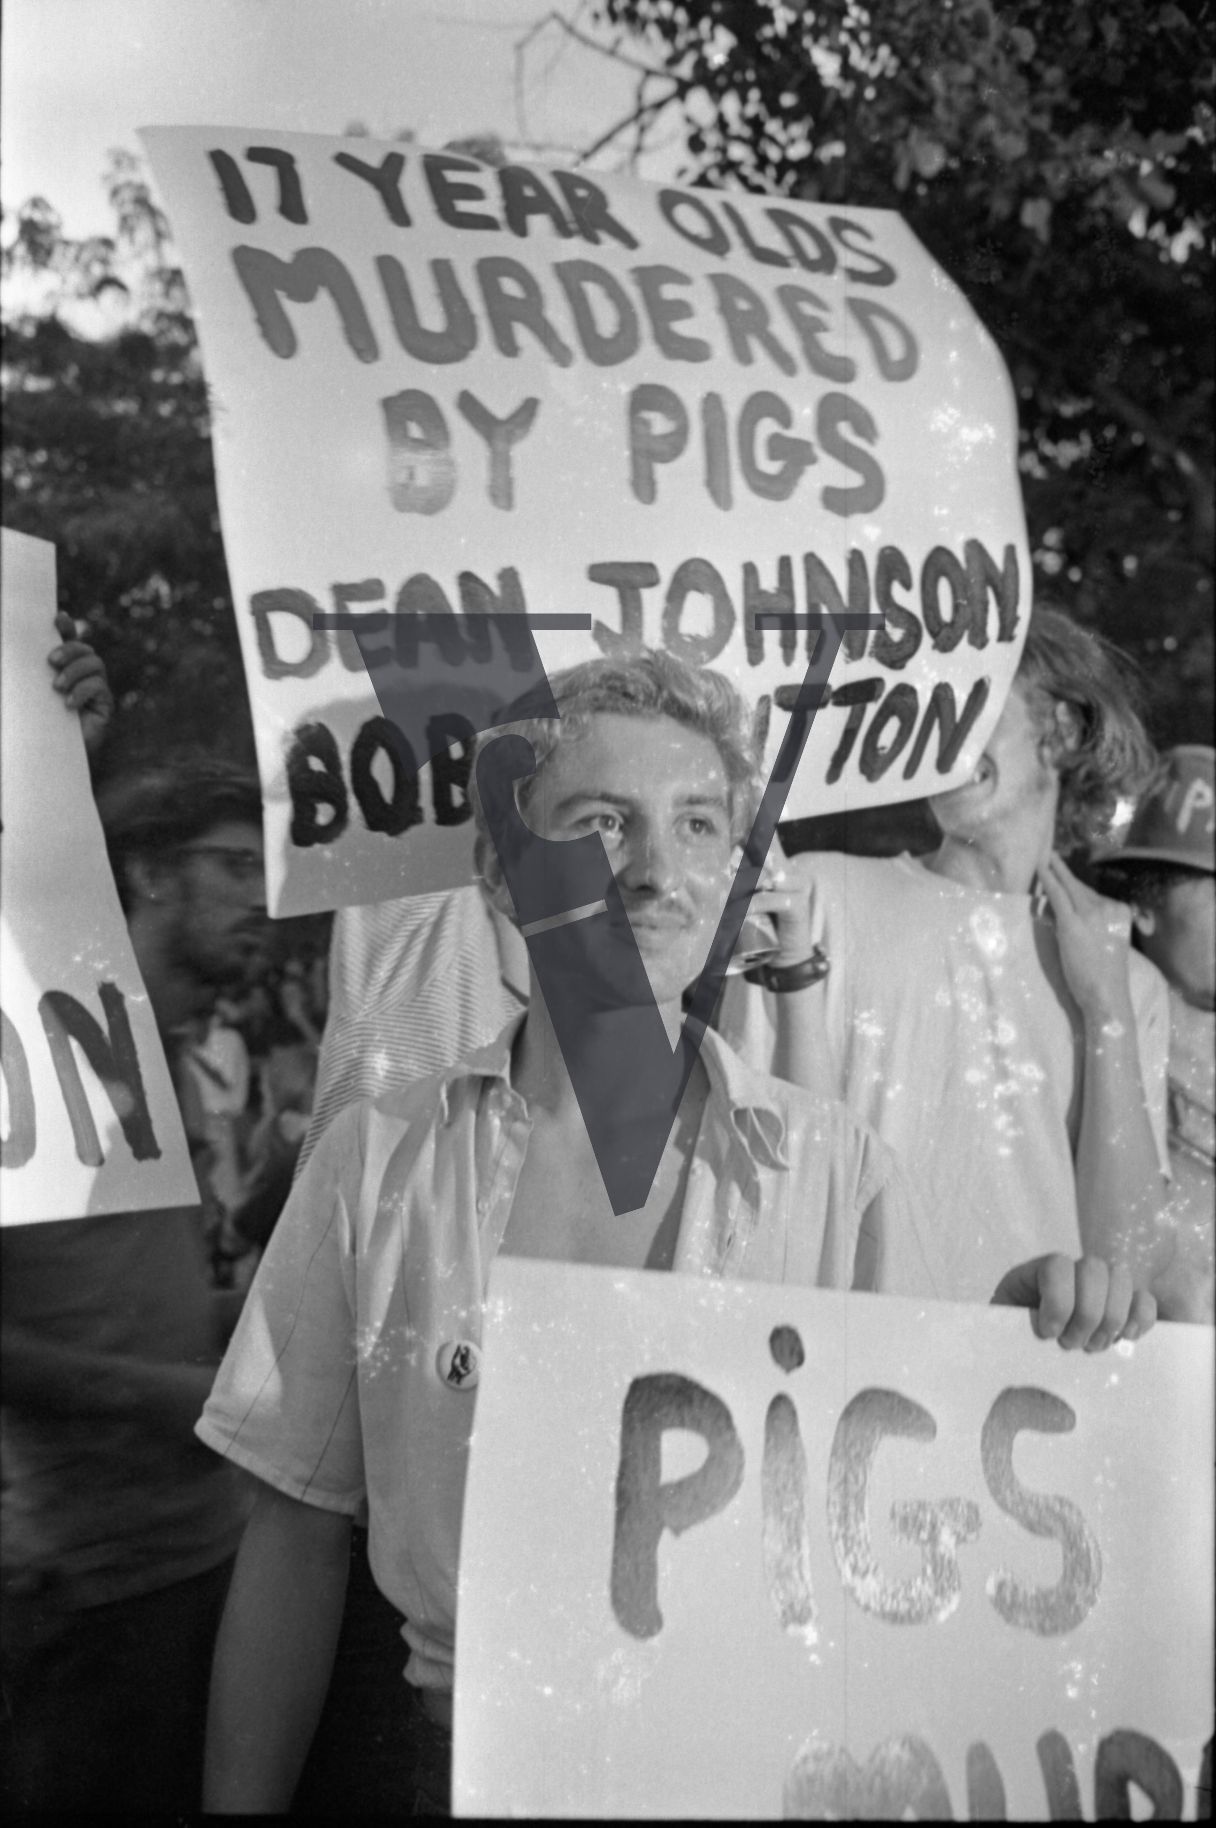 Chicago, Anti-war rallies in Lincoln Park, placards read 12 Year Olds Murderd by Pigs, Dean Johnson and Bob Hutton.